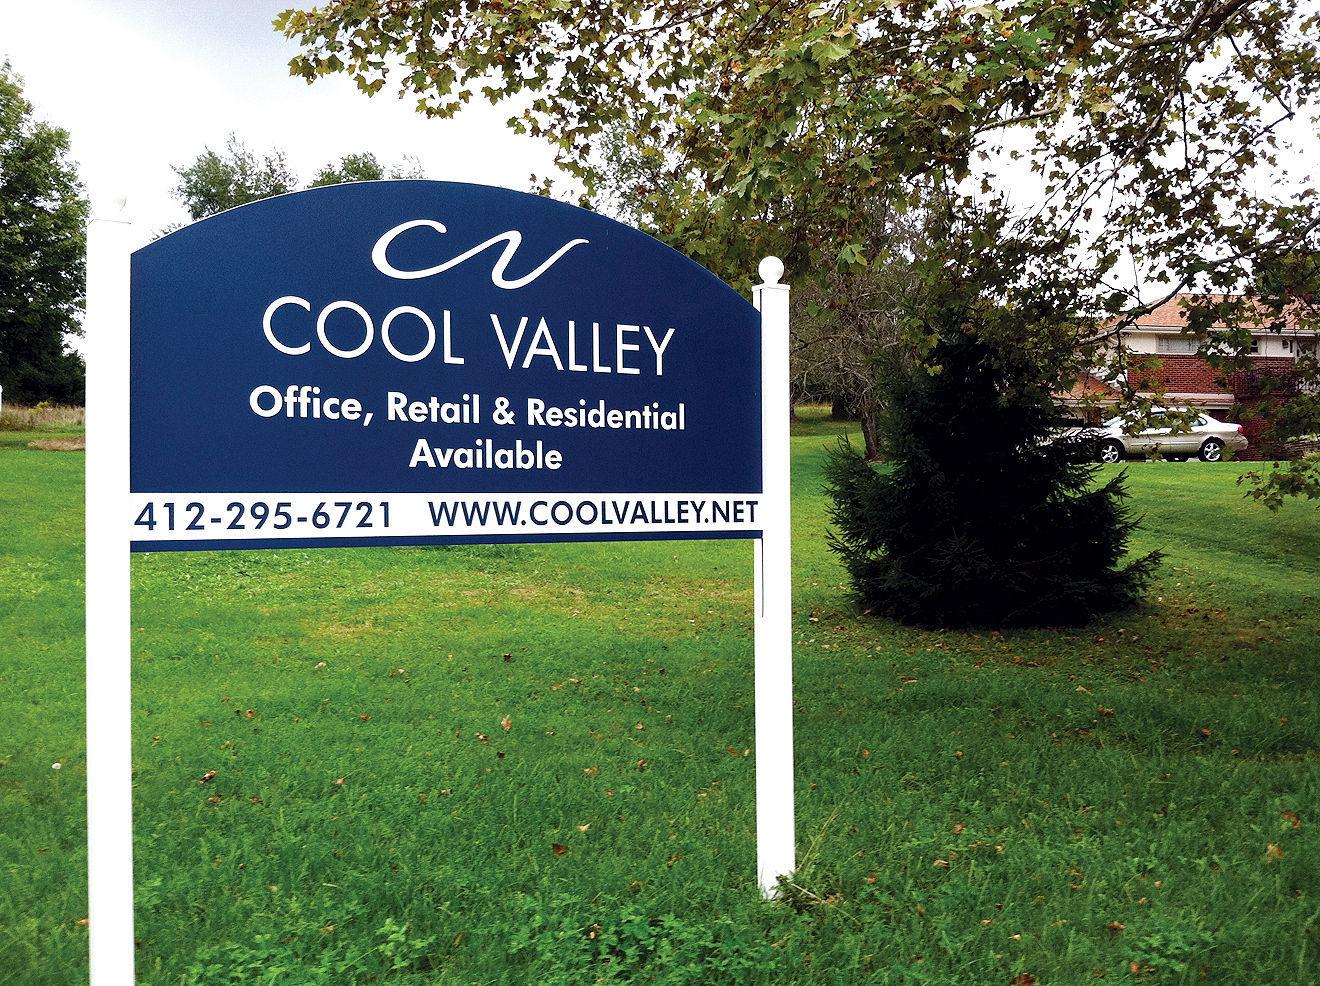 $1 Million to Develop Cool Valley in Cecil Township